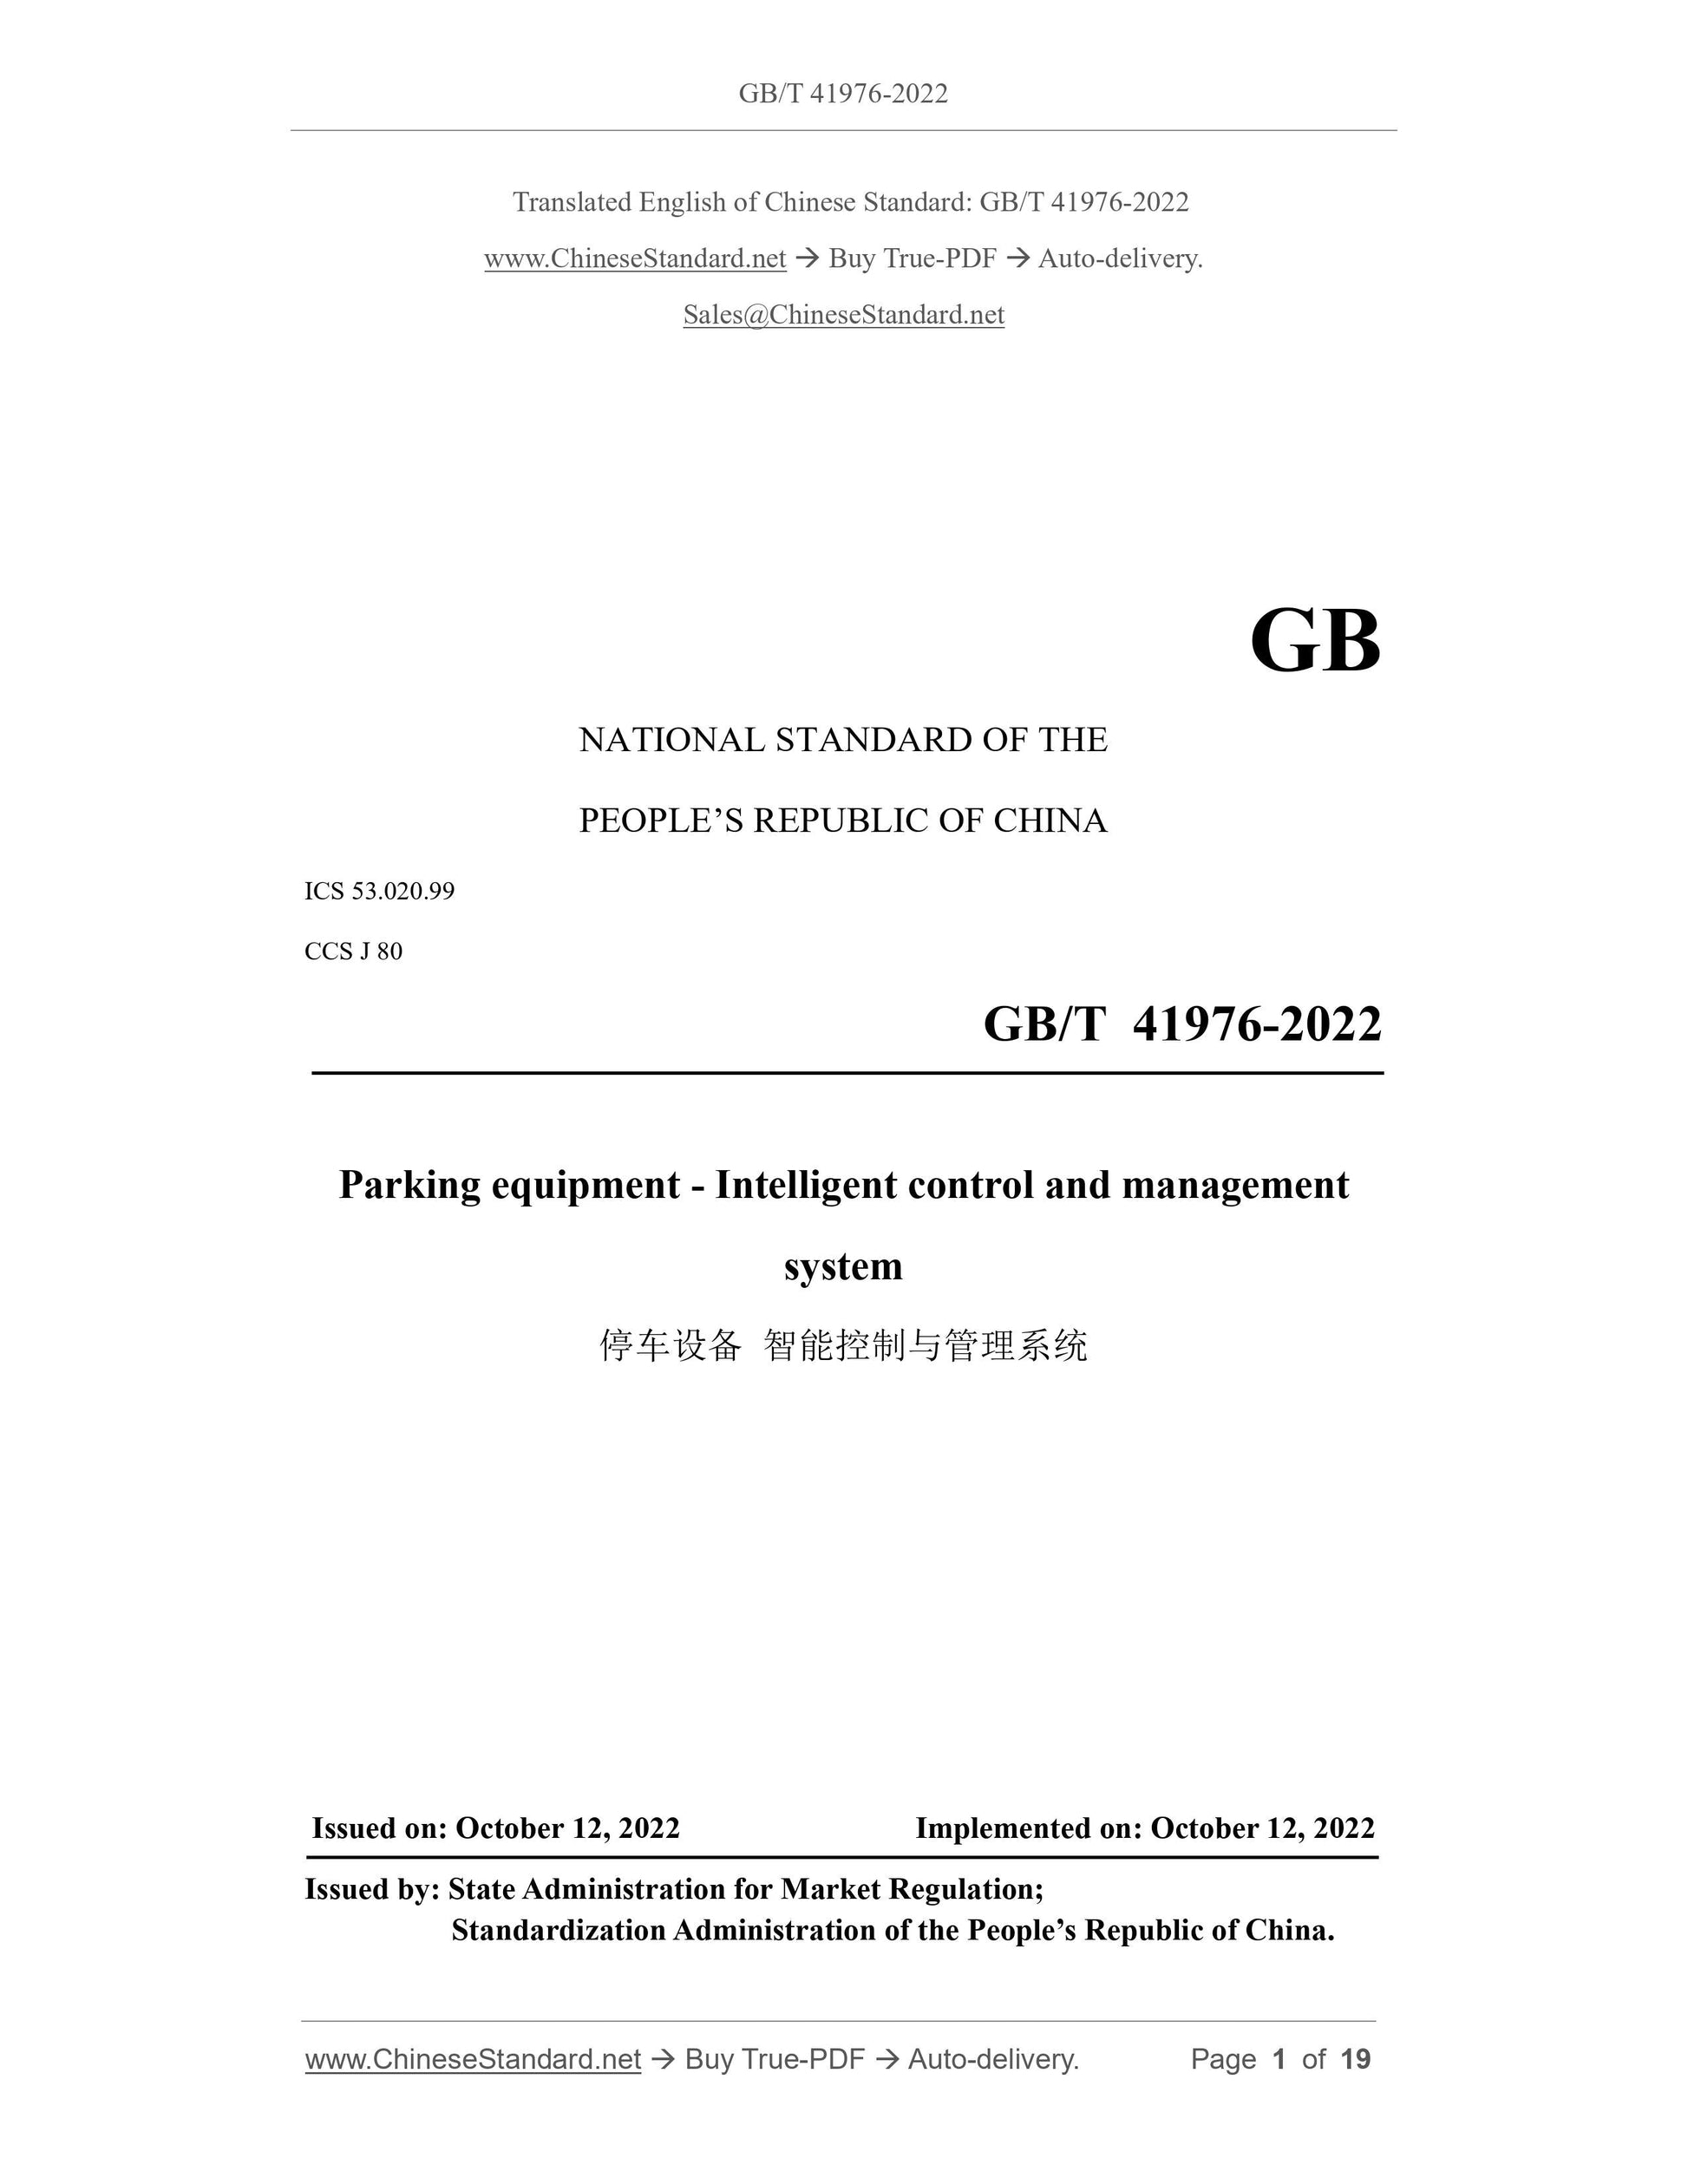 GB/T 41976-2022 Page 1